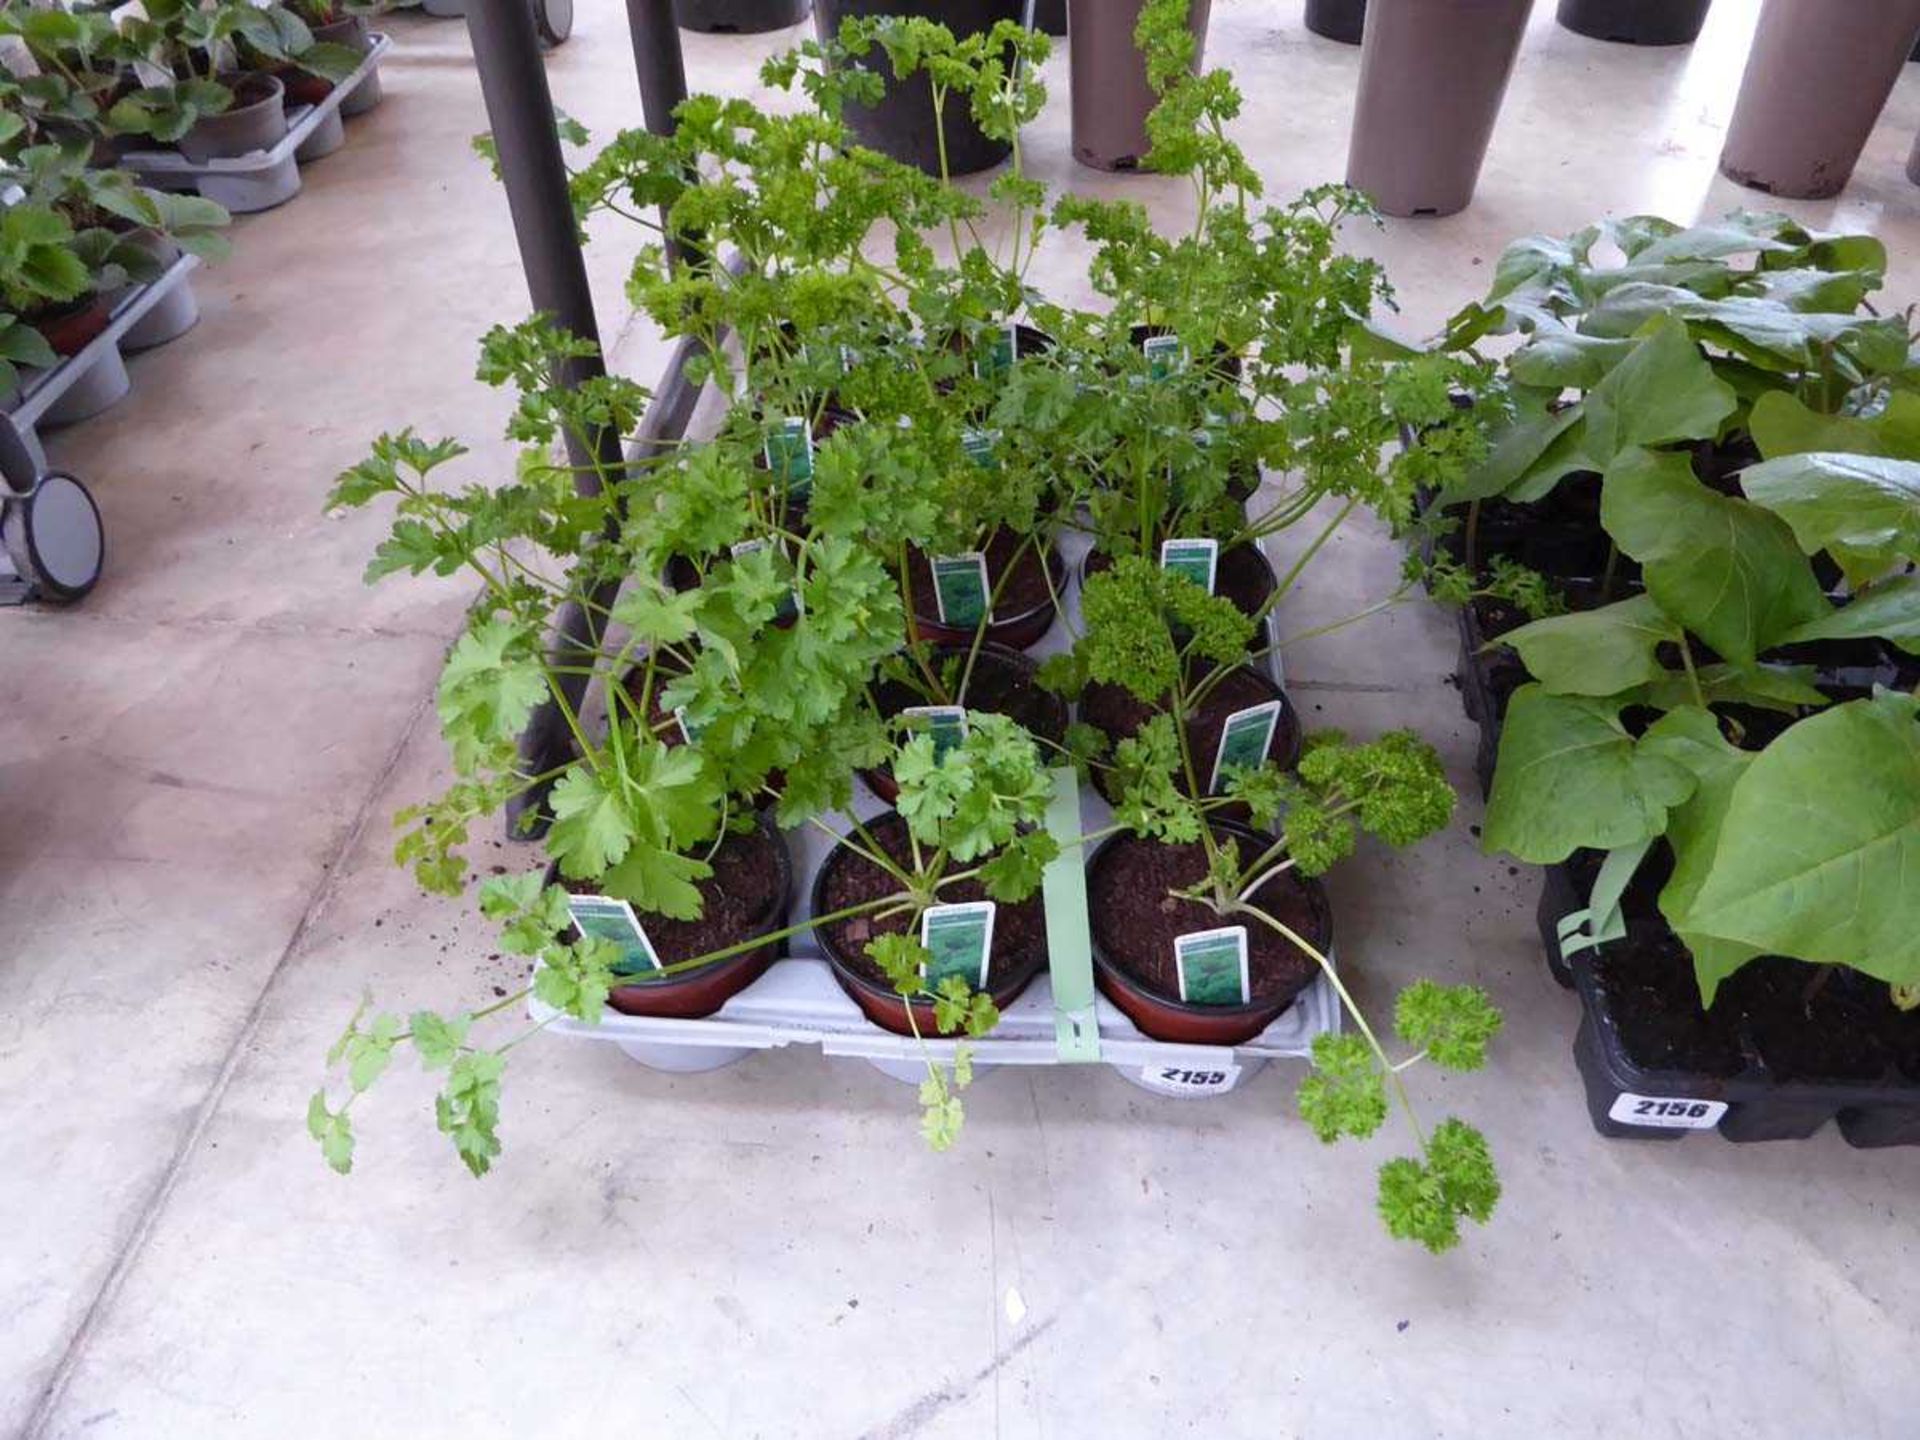 Tray containing 15 pots of curly leaf parsley